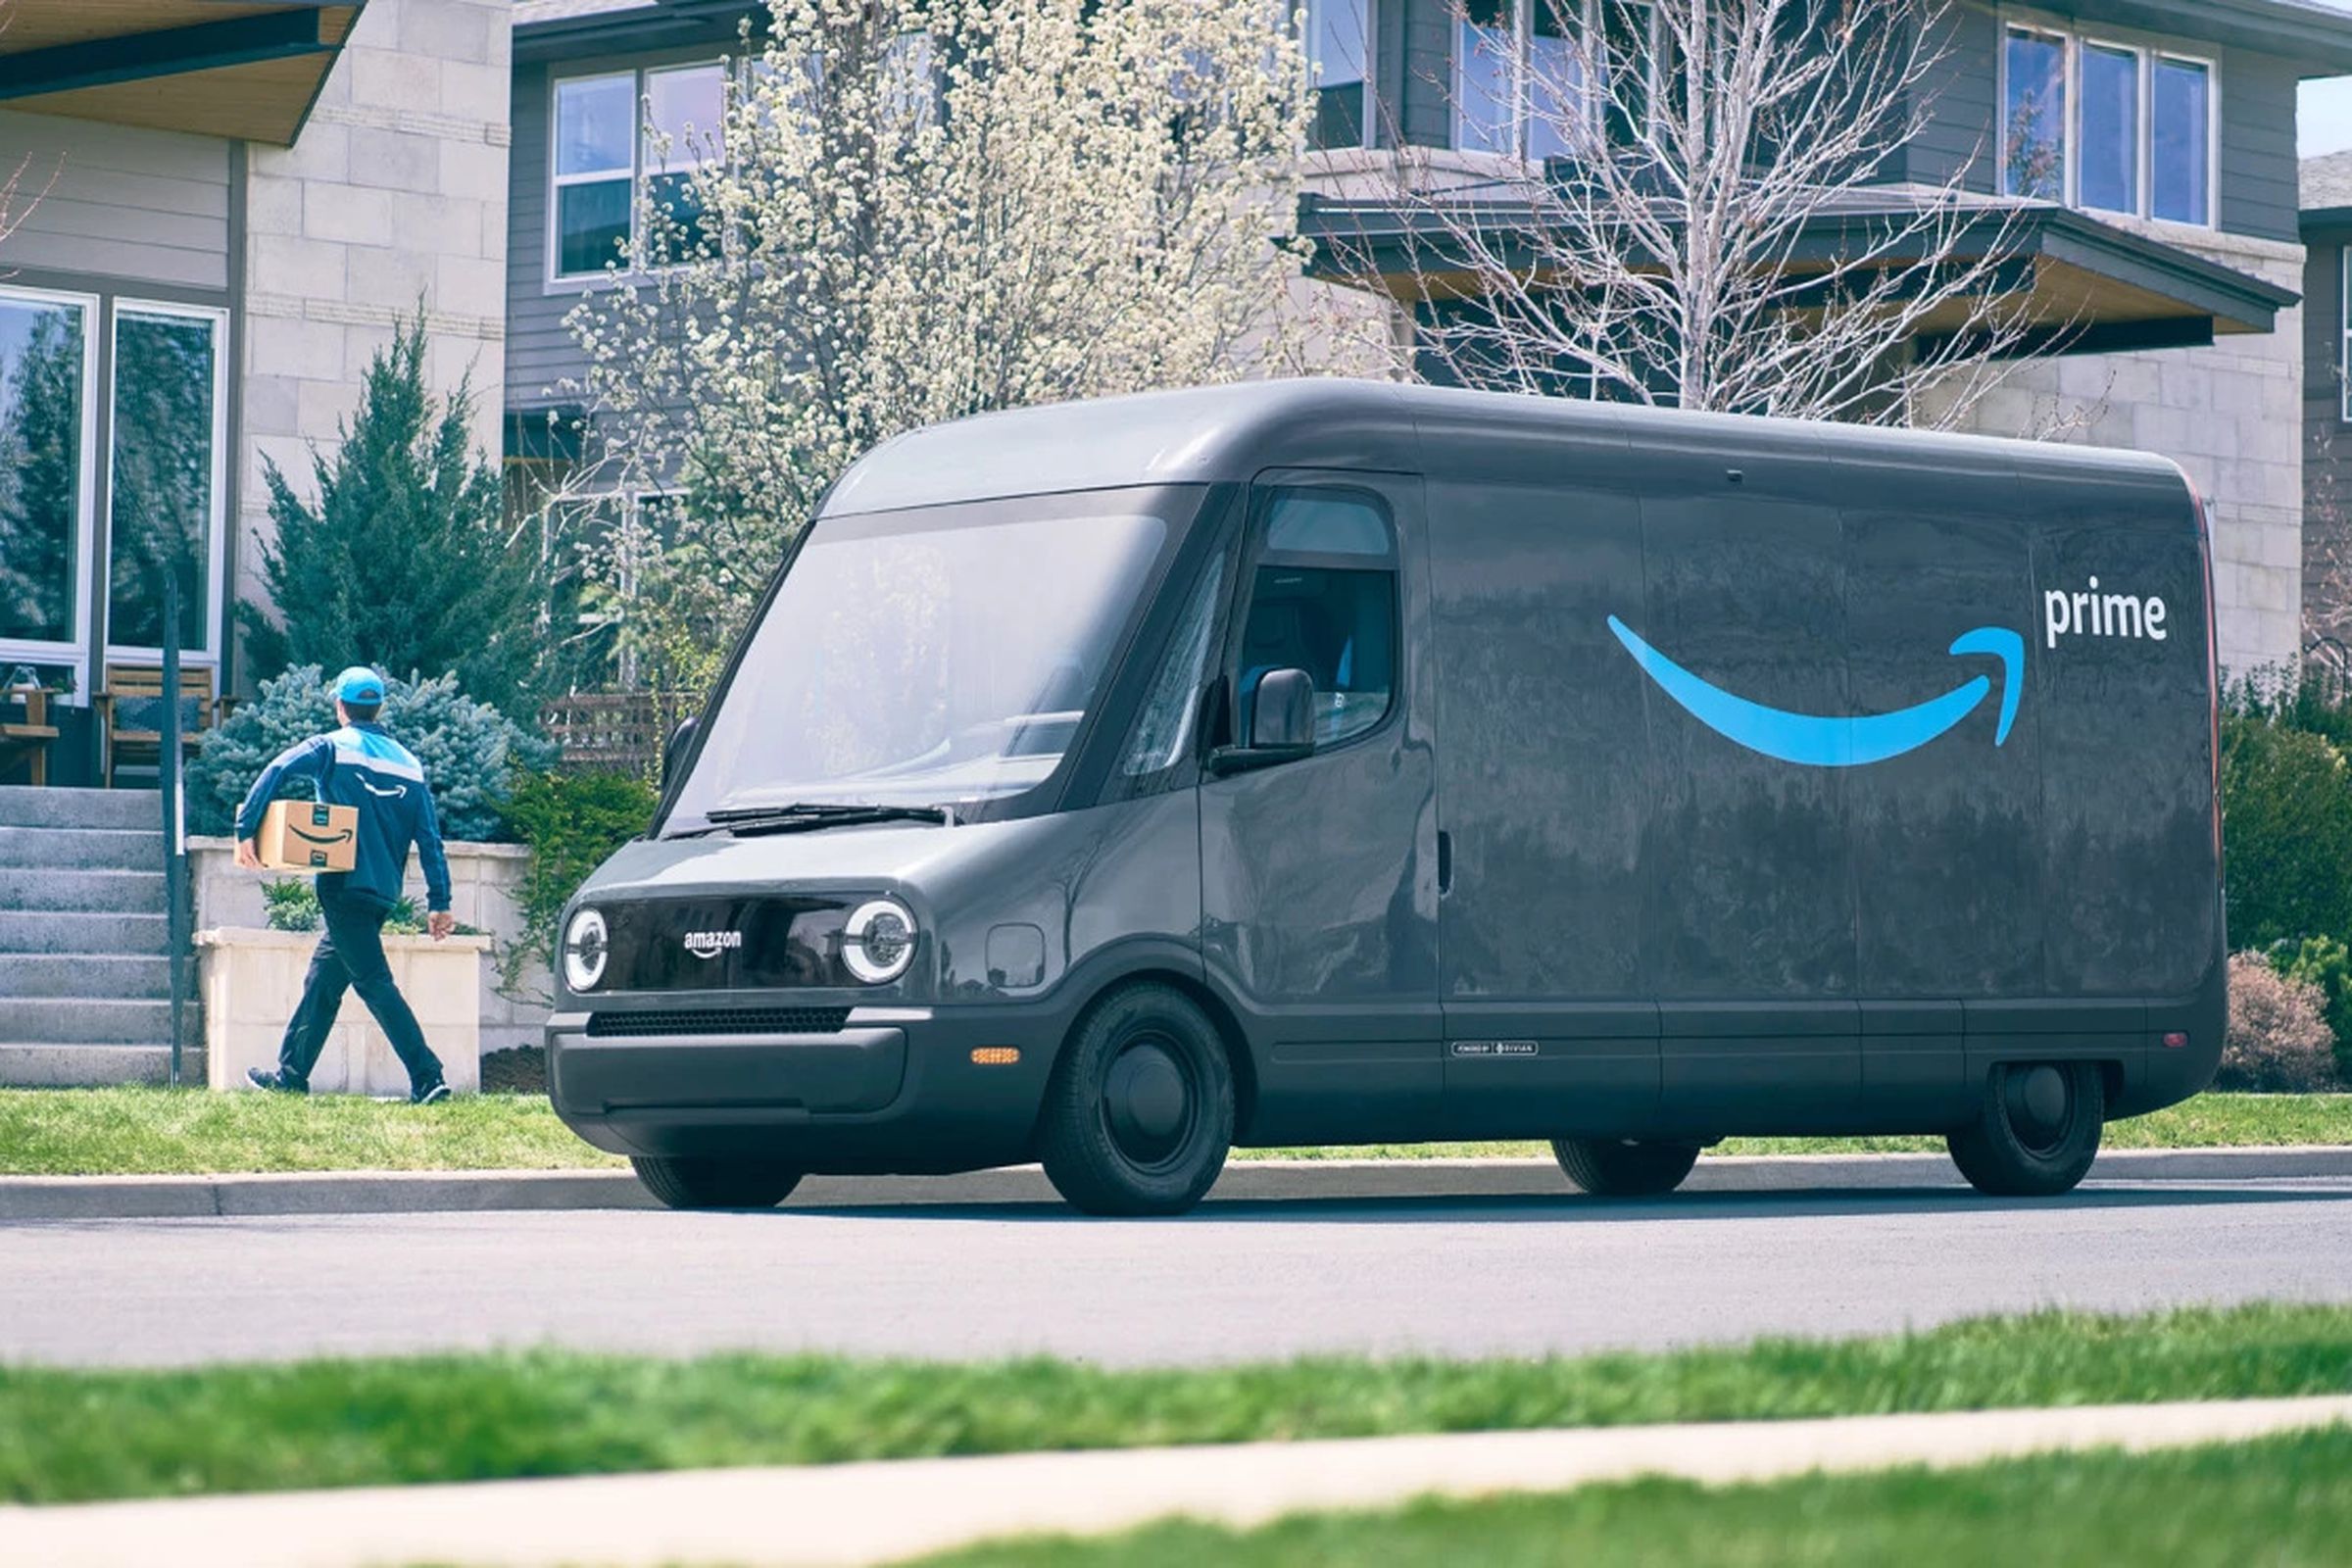 An image showing a Rivian van with Amazon branding parked in front of someone’s house